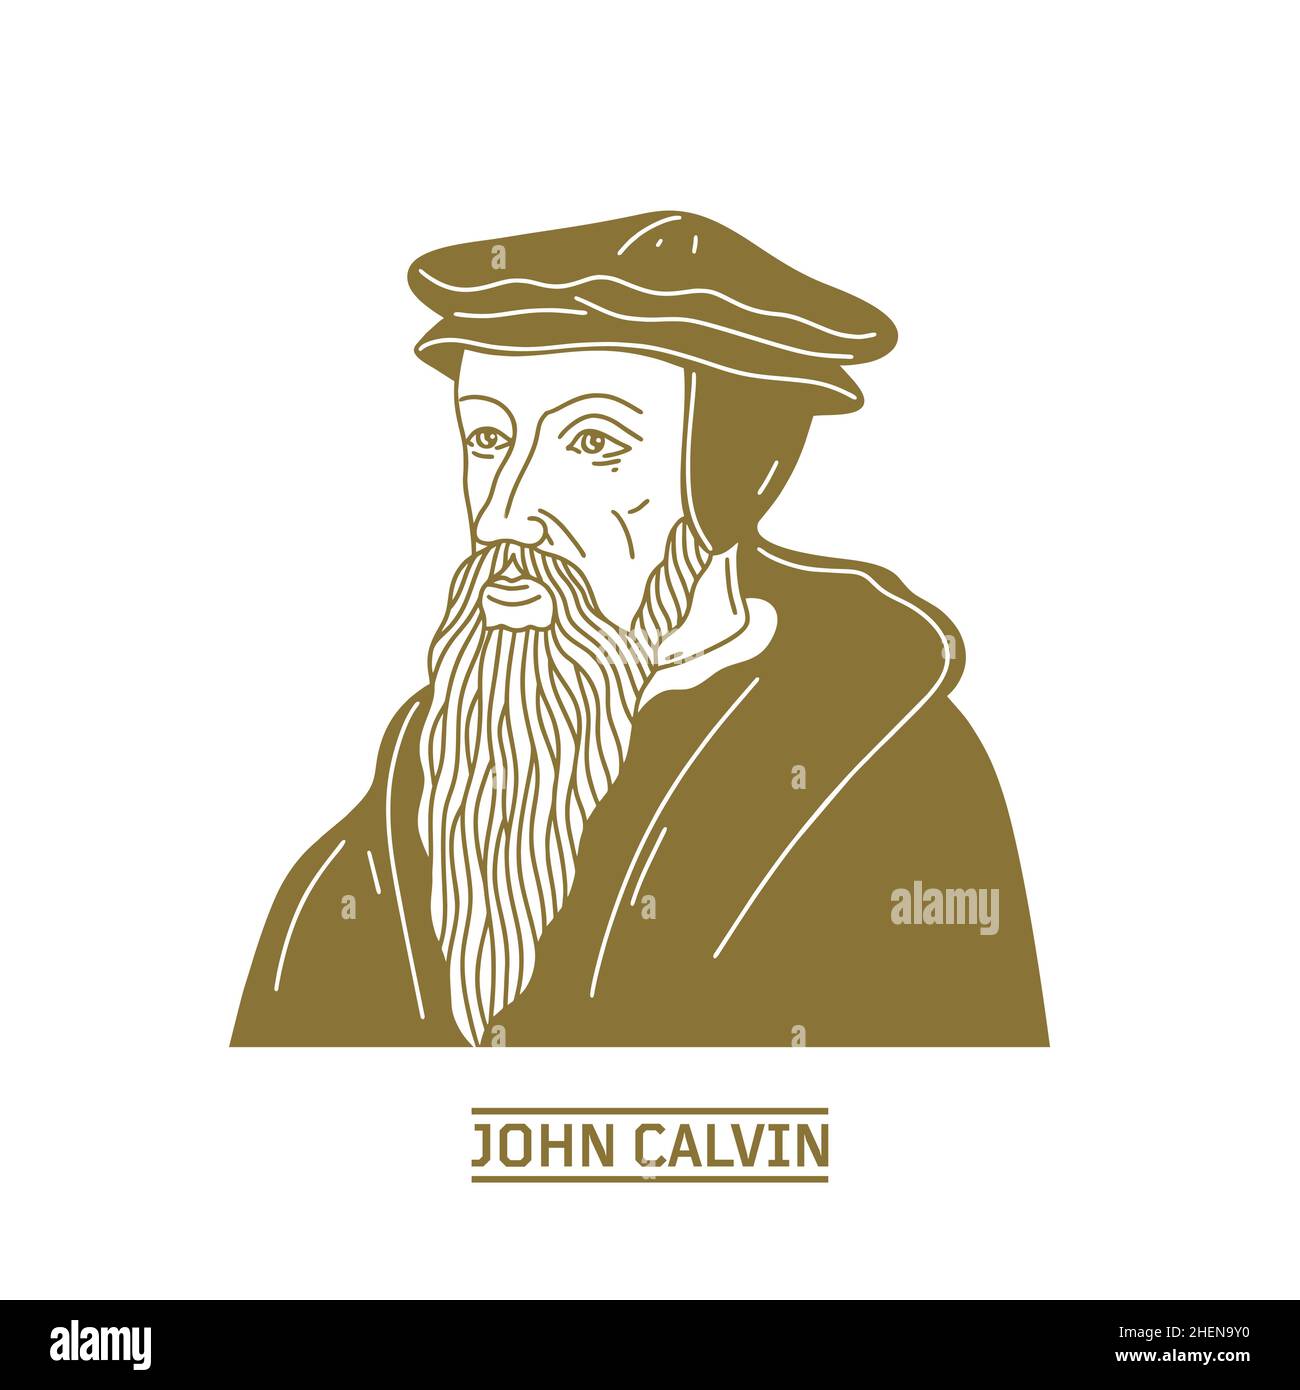 John Calvin (1509-1564) was a French theologian, pastor and reformer in Geneva during the Protestant Reformation. Christian figure. Stock Vector